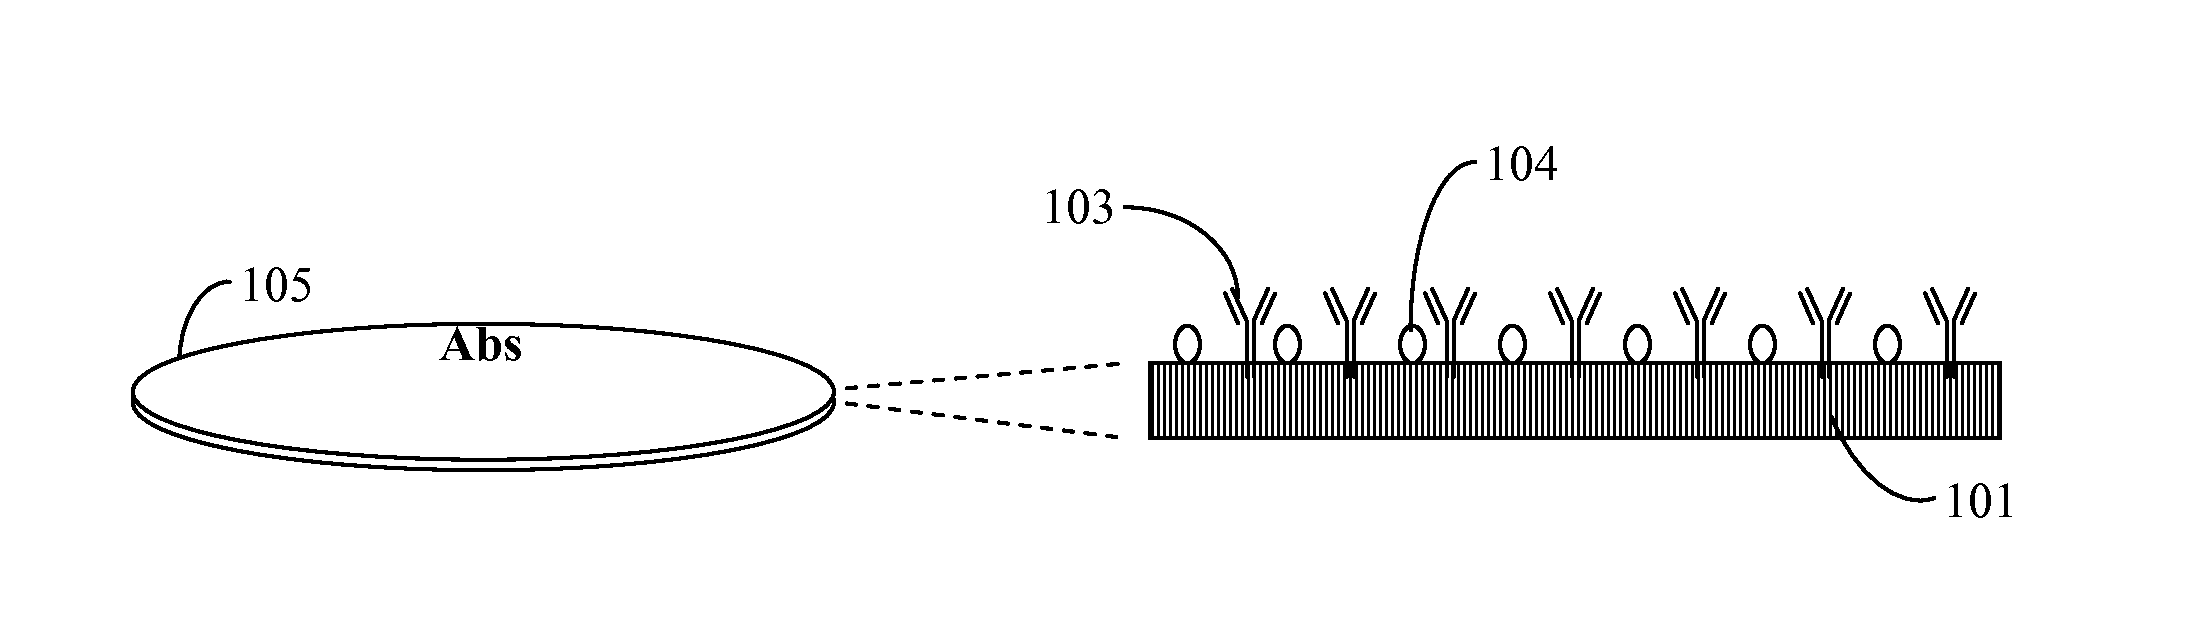 Method and Apparatus for Rapid Detection and Identification of Live Microorganisms Immobilized On Permeable Membrane by Antibodies